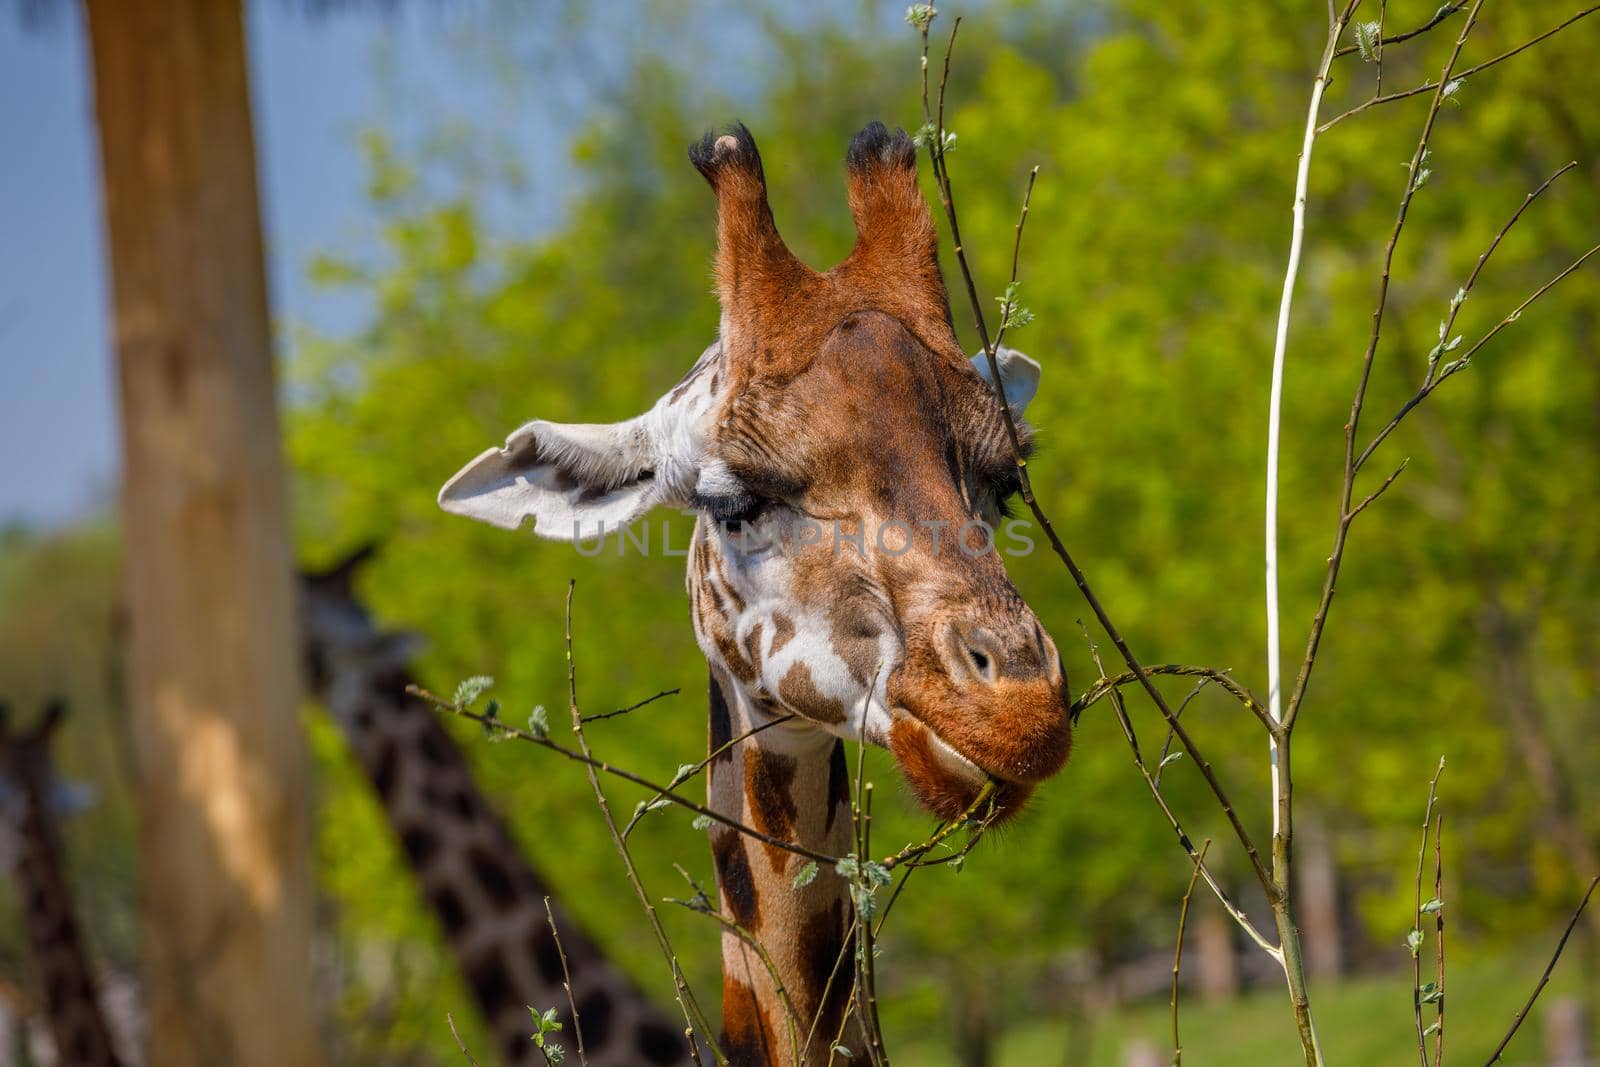 An adult giraffe with small horns gnaws at young tree twigs. Close-up